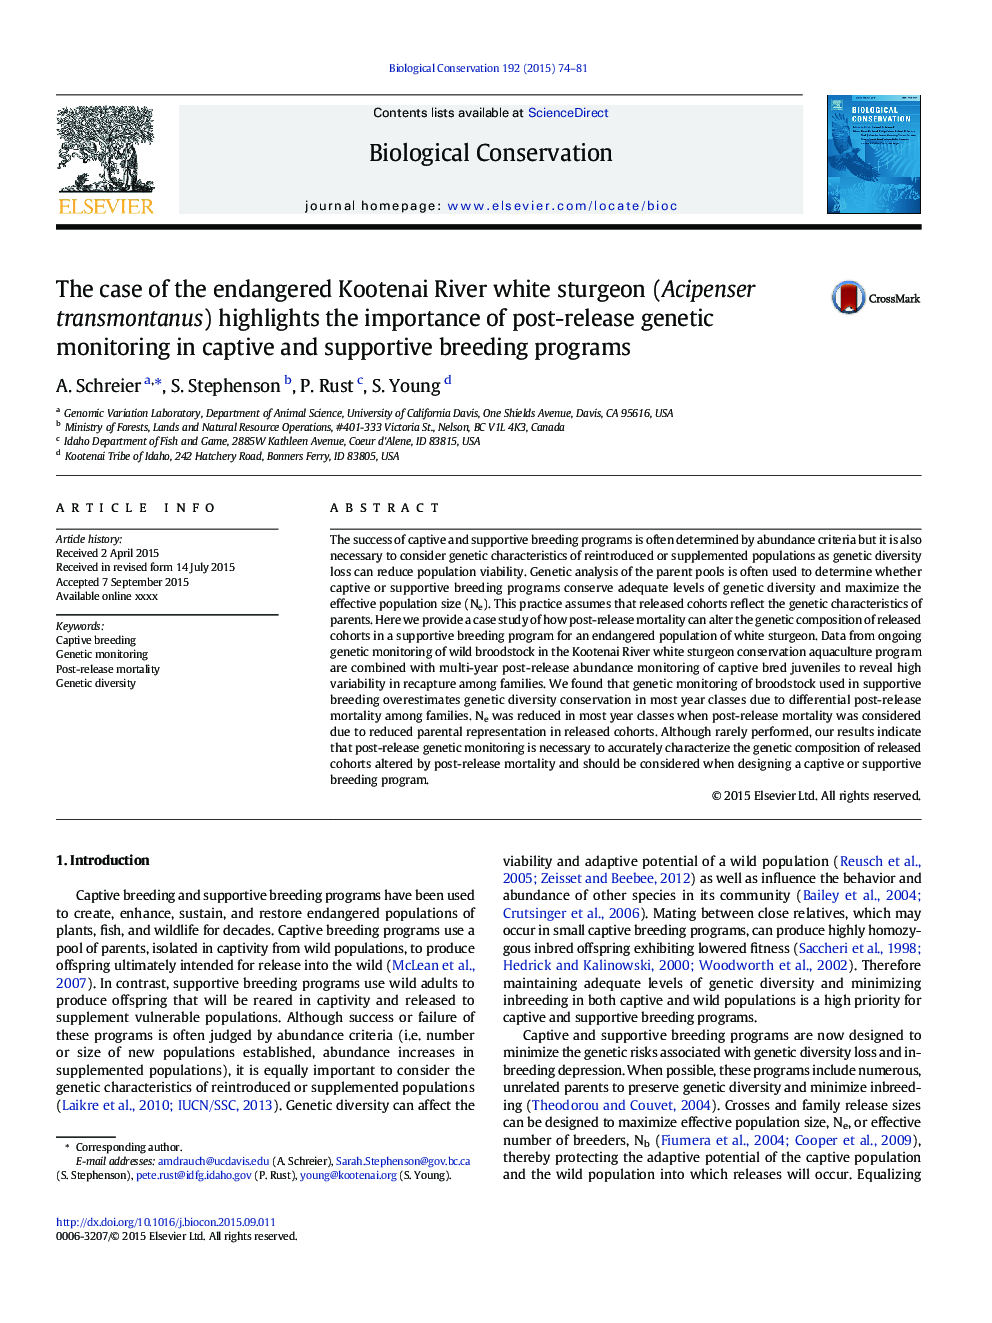 The case of the endangered Kootenai River white sturgeon (Acipenser transmontanus) highlights the importance of post-release genetic monitoring in captive and supportive breeding programs